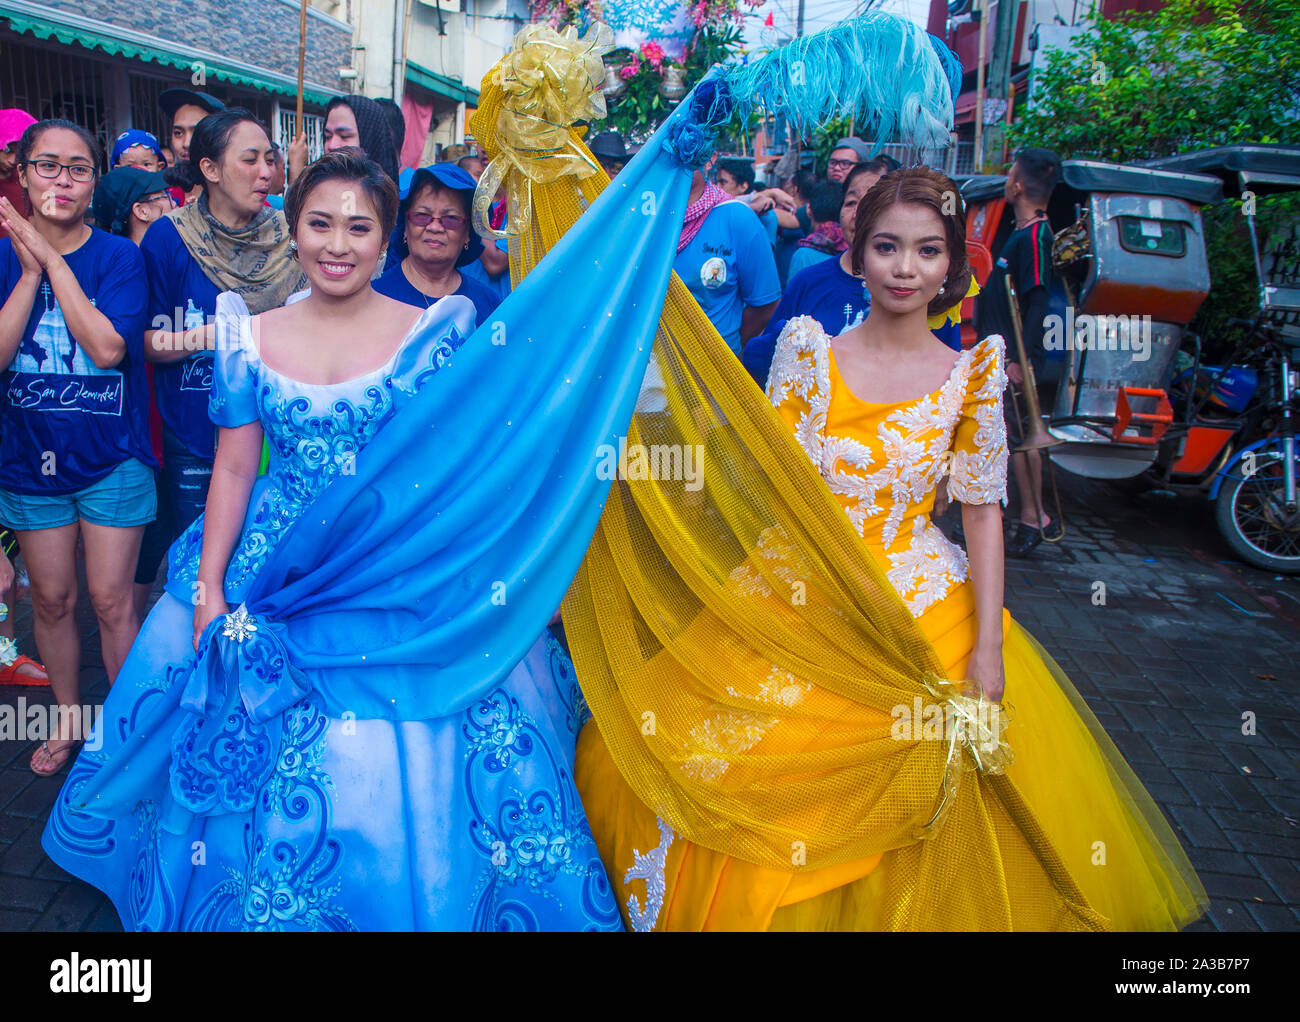 Participants in the Higantes festival in Angono Philippines Stock Photo